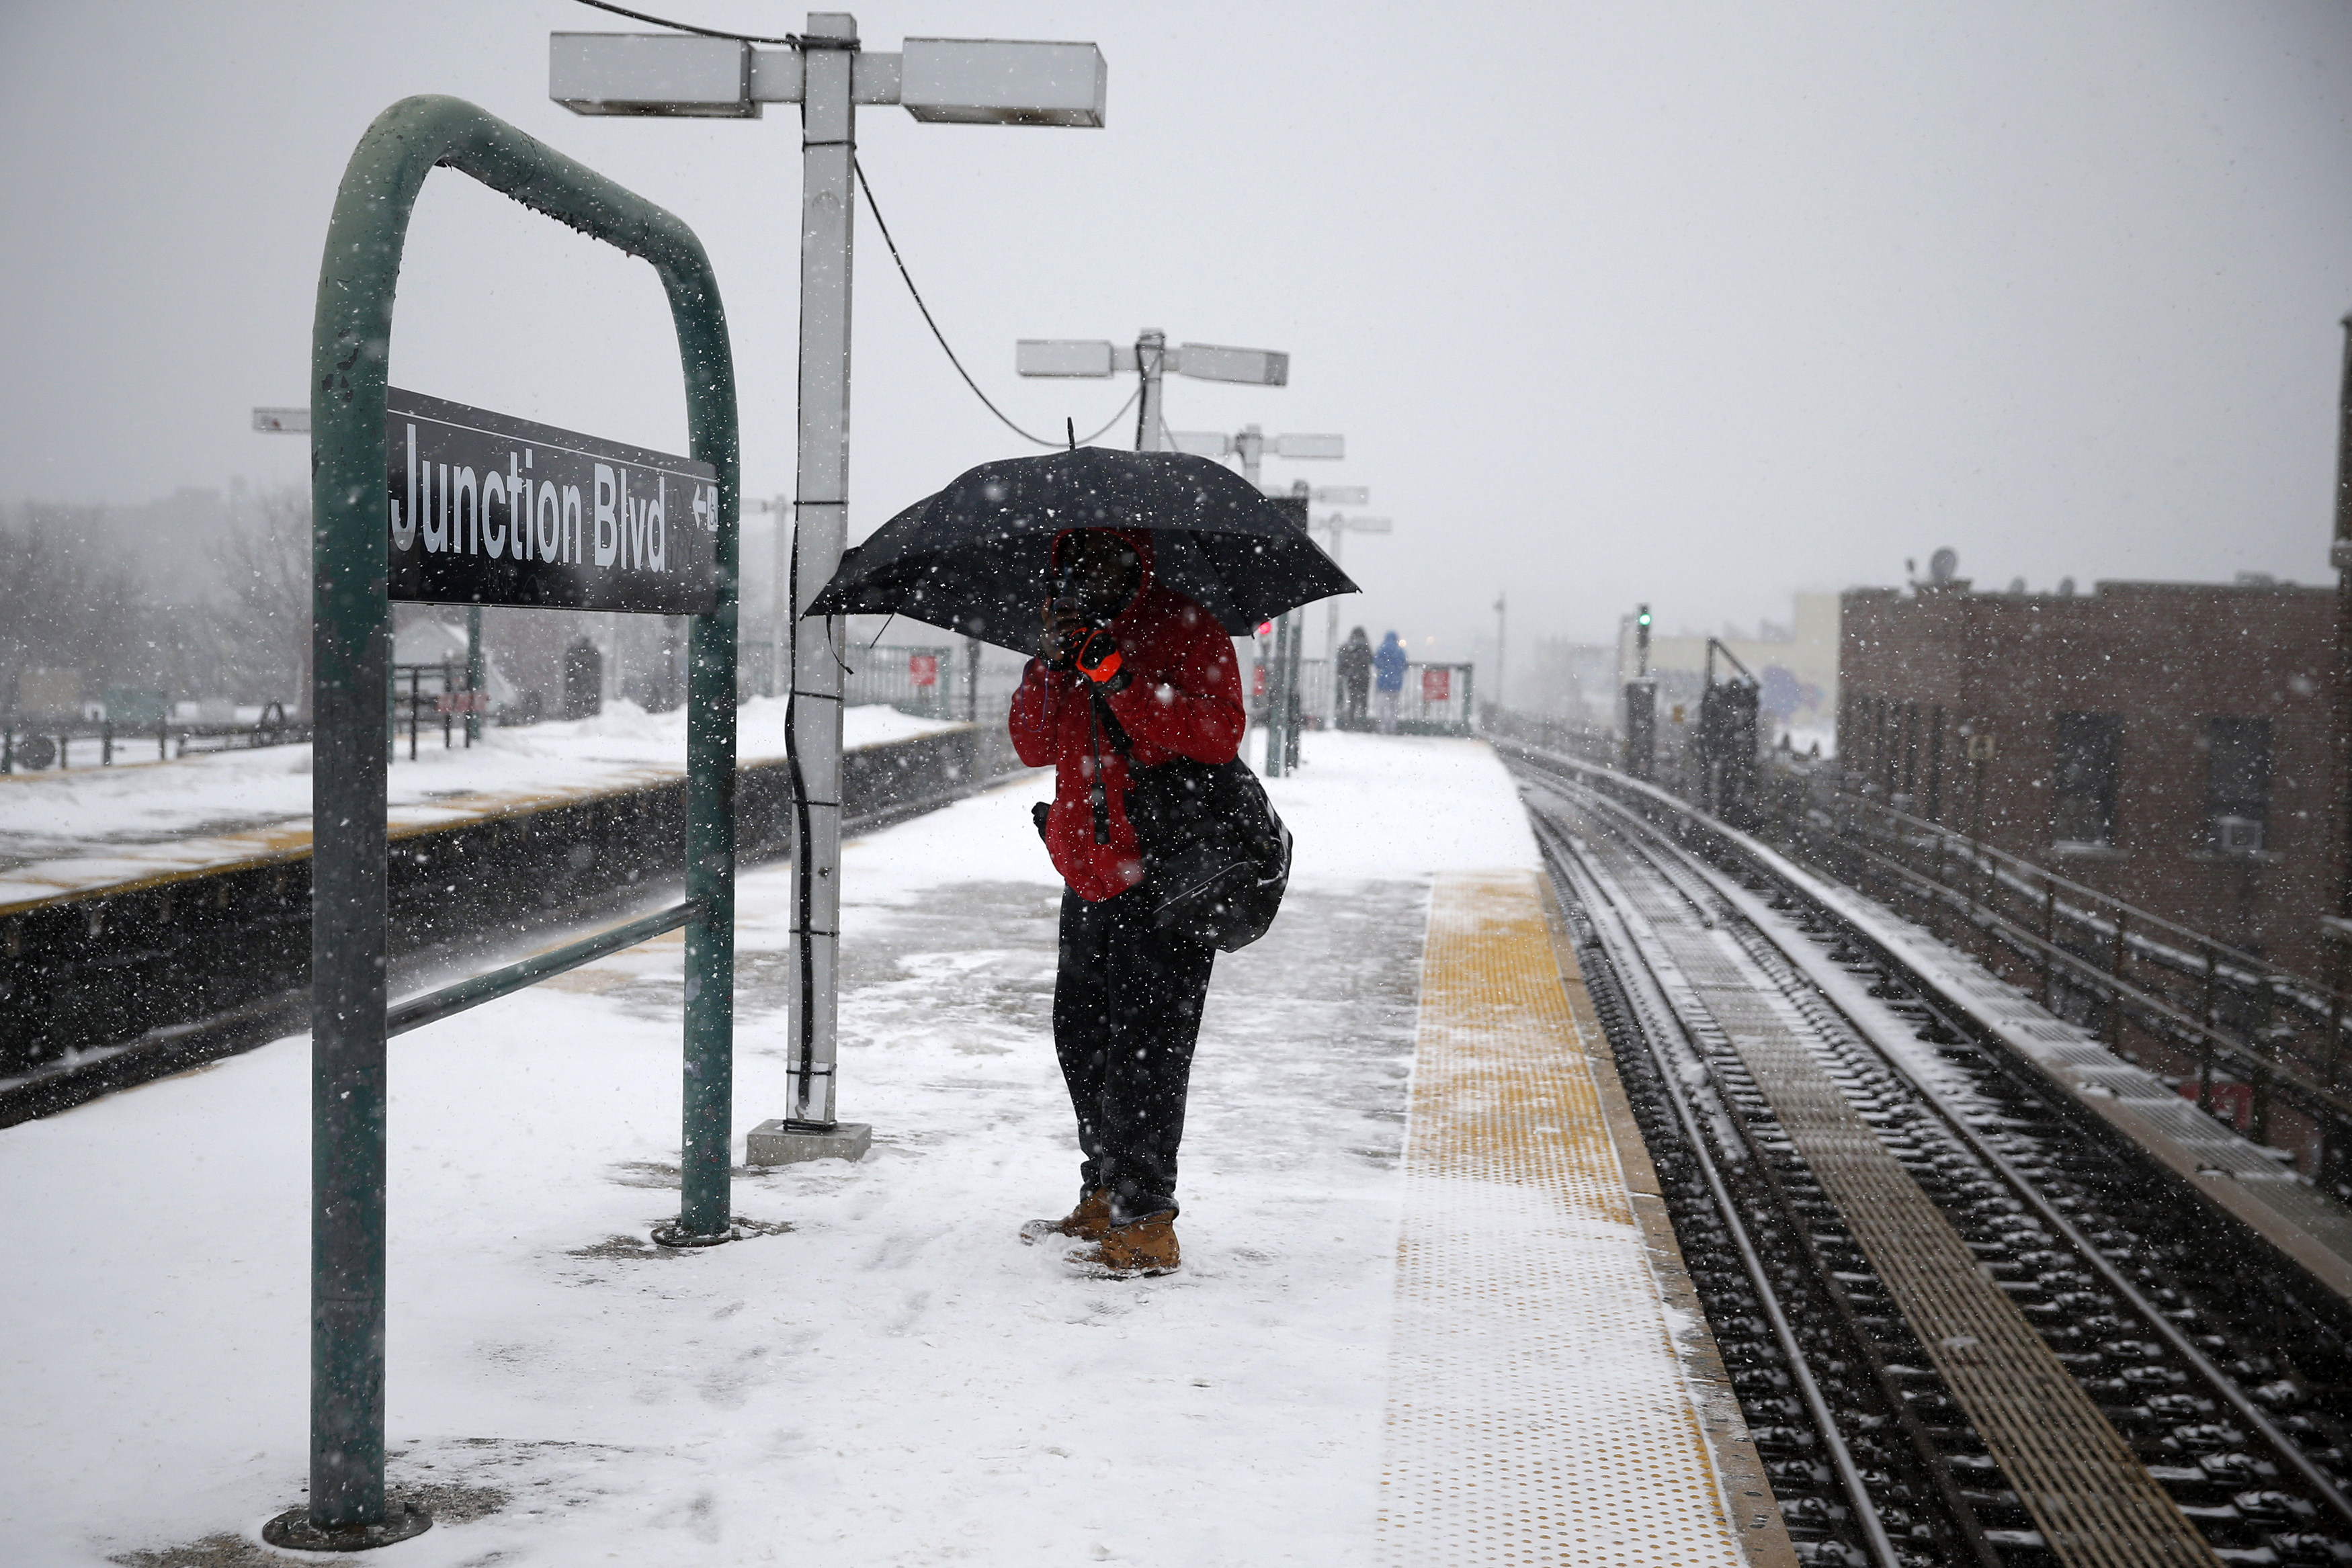 A man stands with an umbrella at the Junction Boulevard stop of the 7 subway train line in the Queens borough of New York